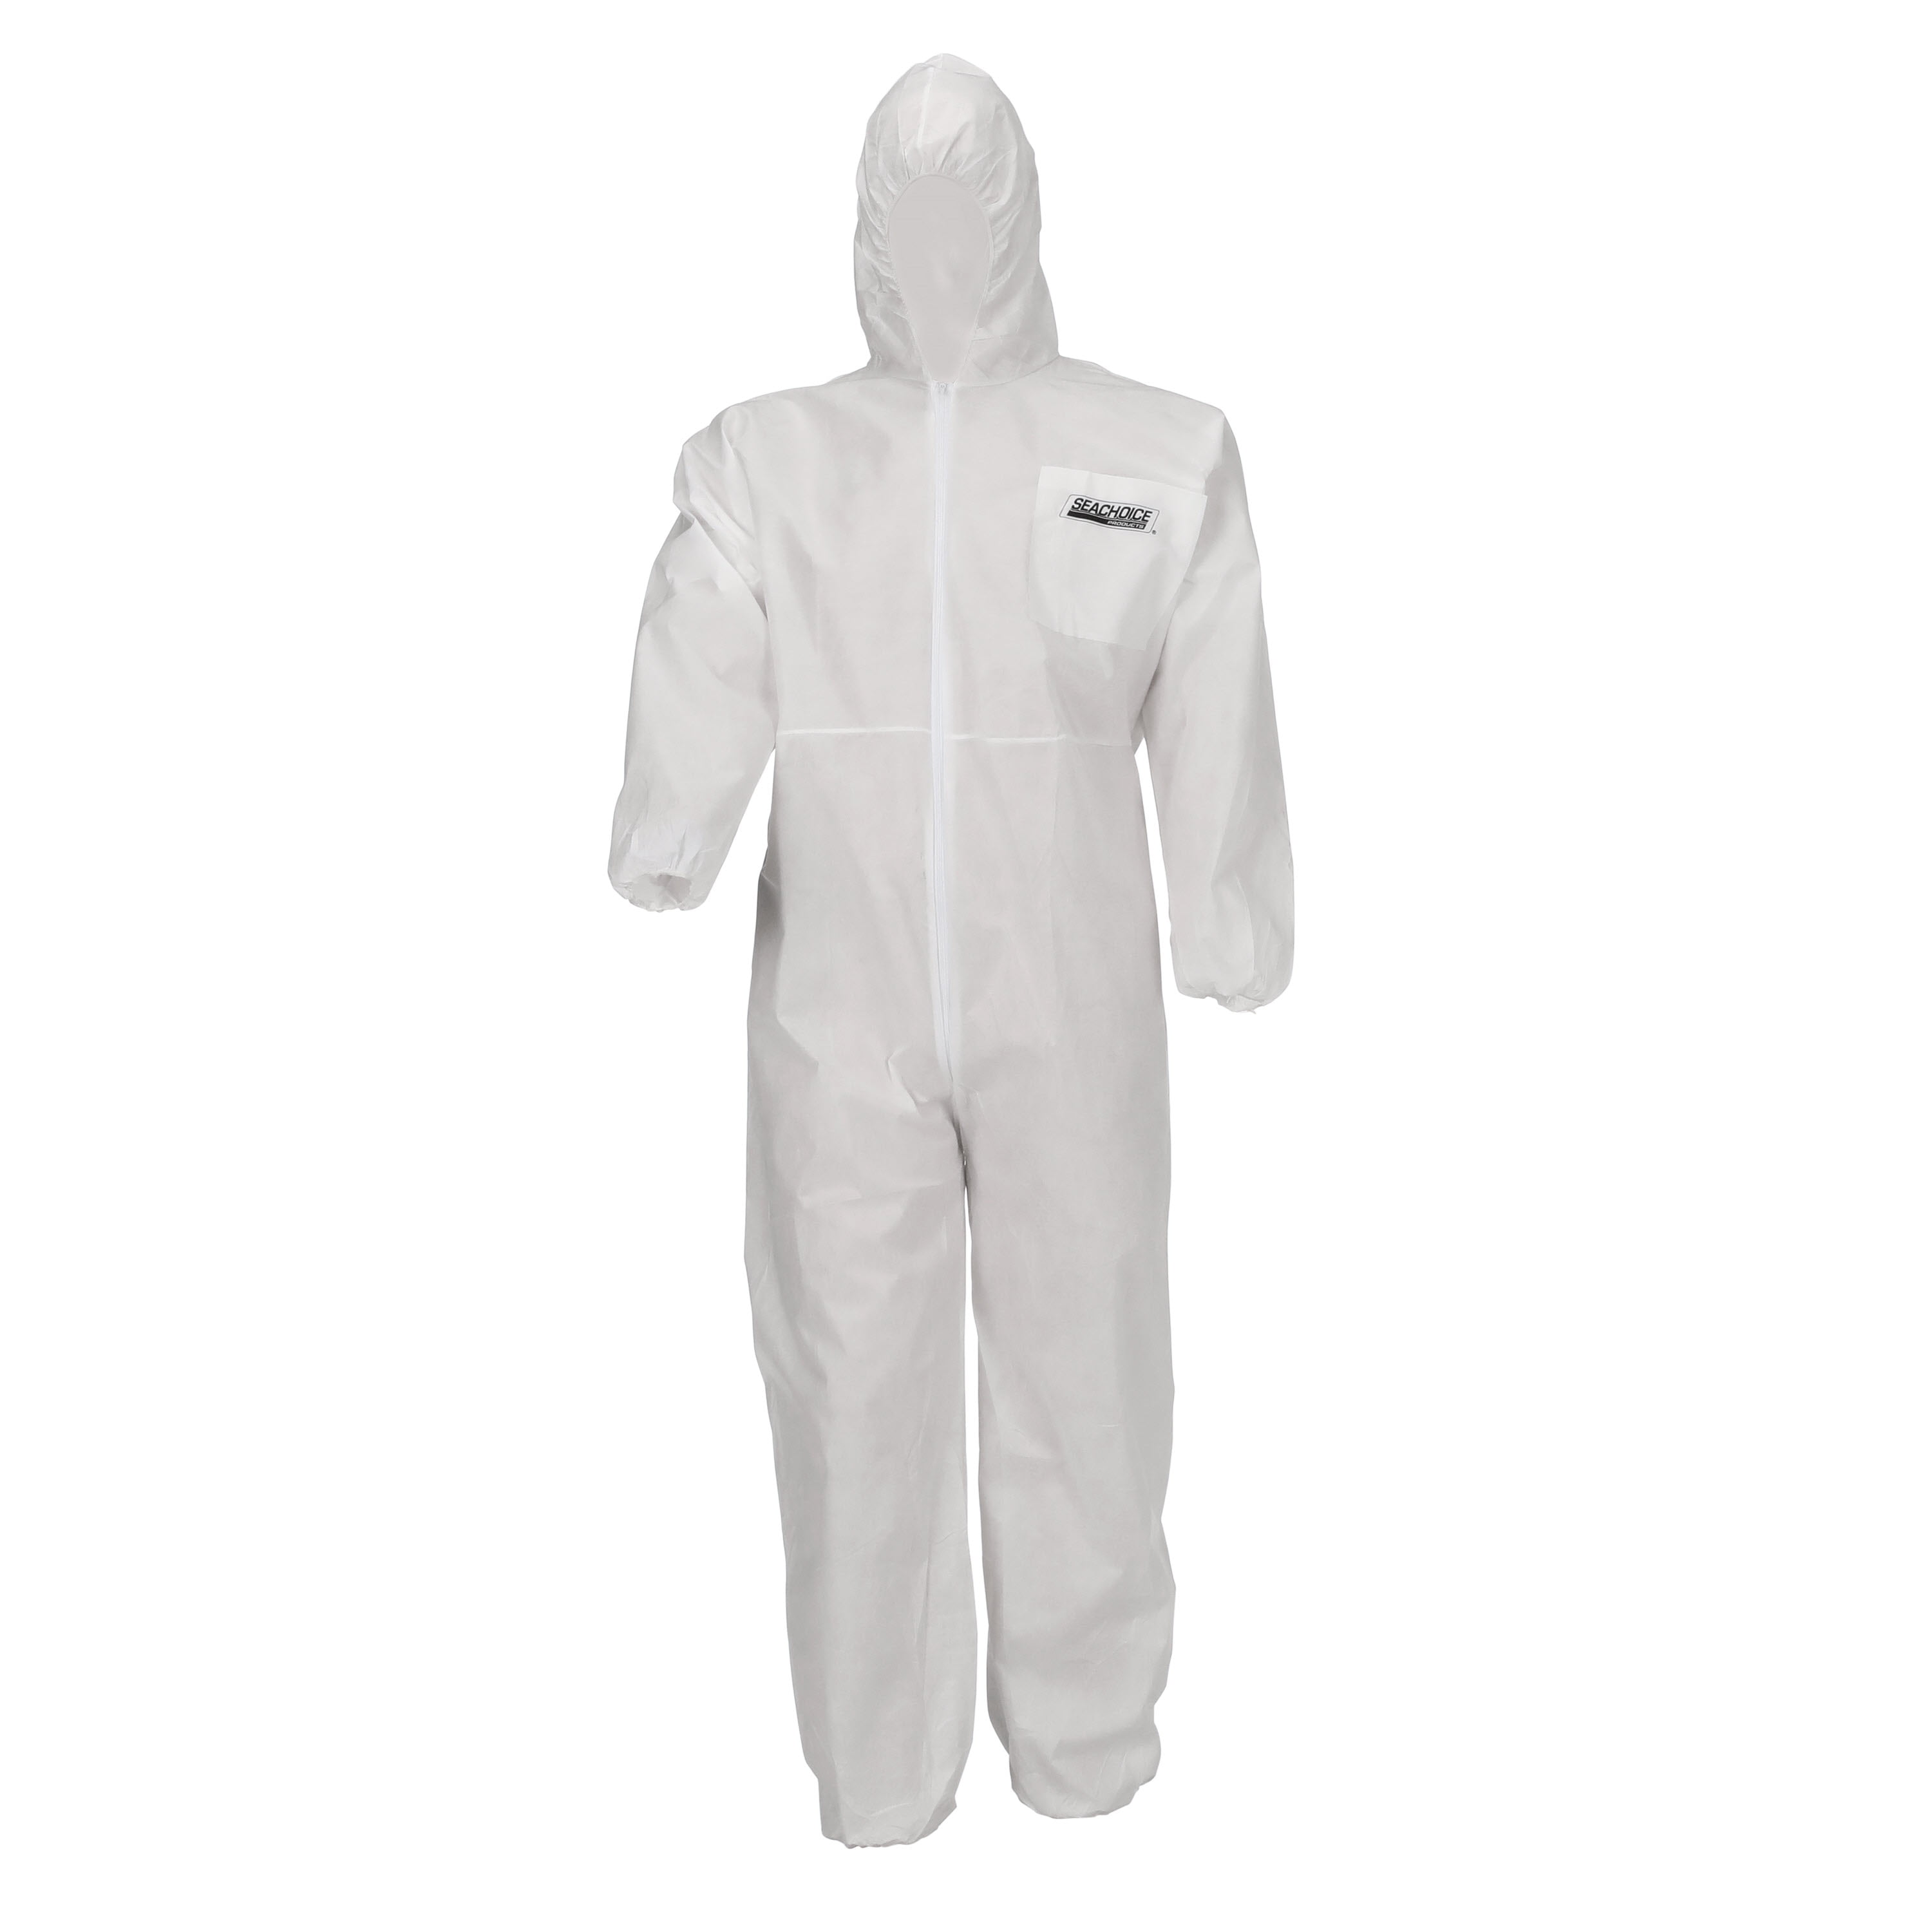 Seachoice 93121 SMS Disposable Protective Breathable Coveralls with Hood,  X-Large - Walmart.com